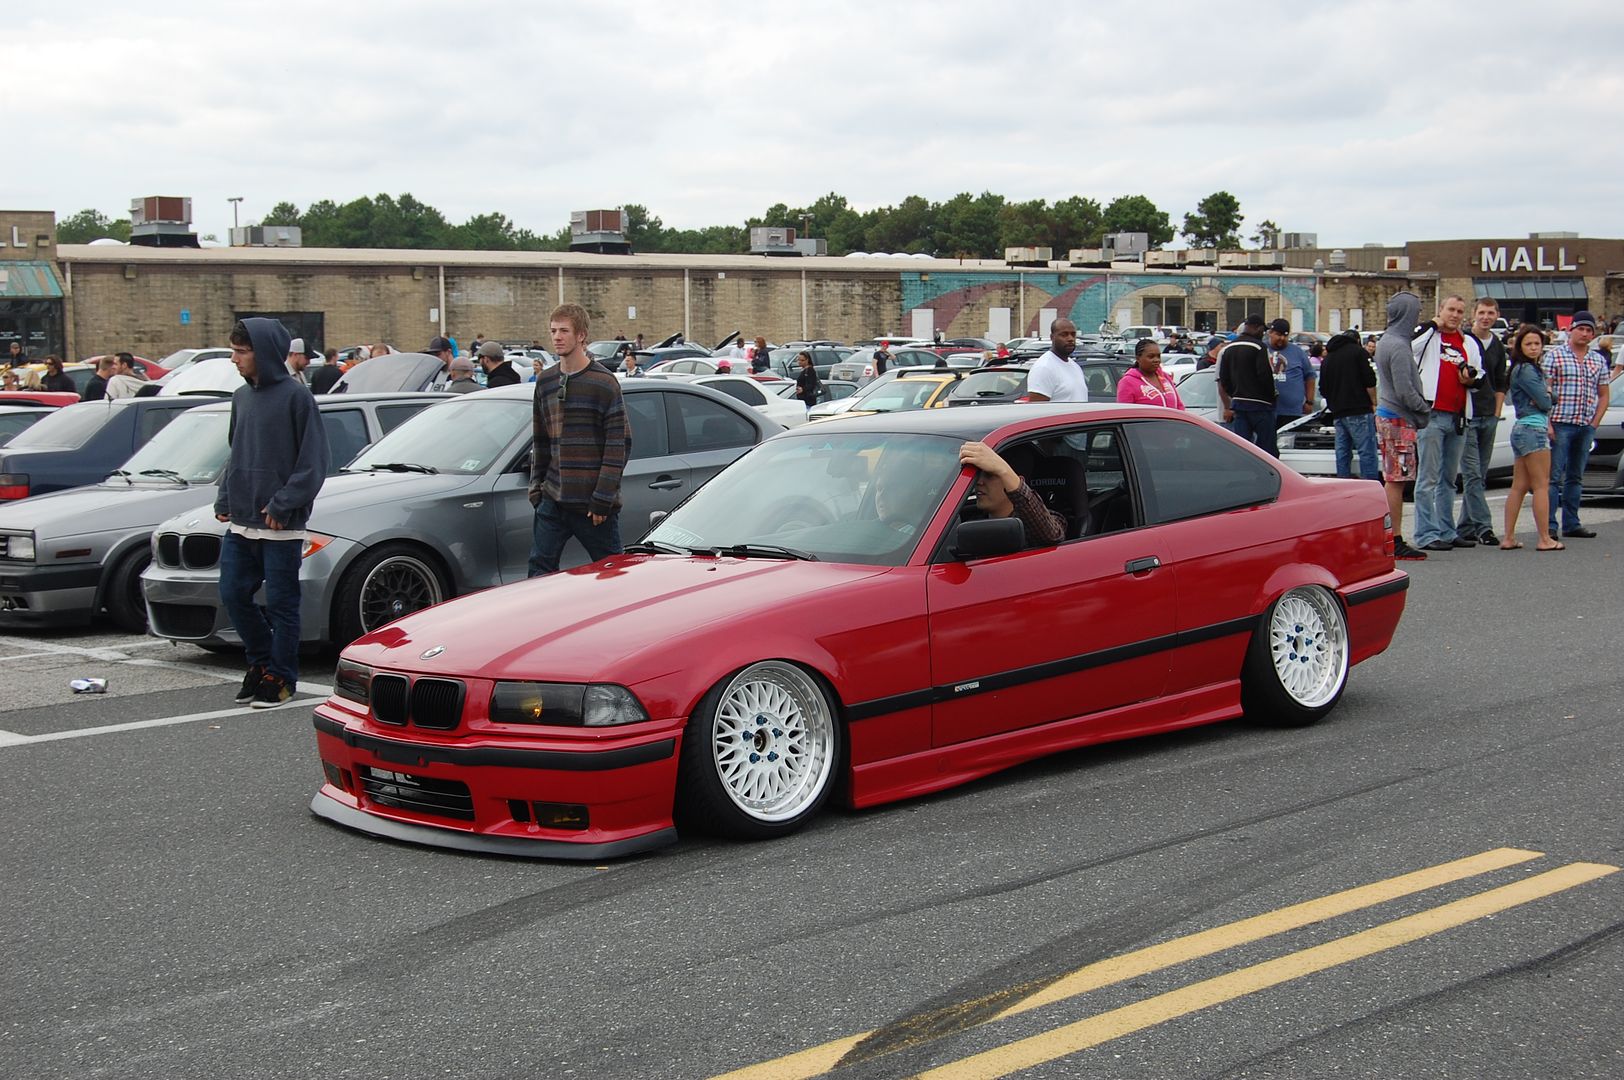 Official picture thread from H20 meet in Ocean City, Maryland